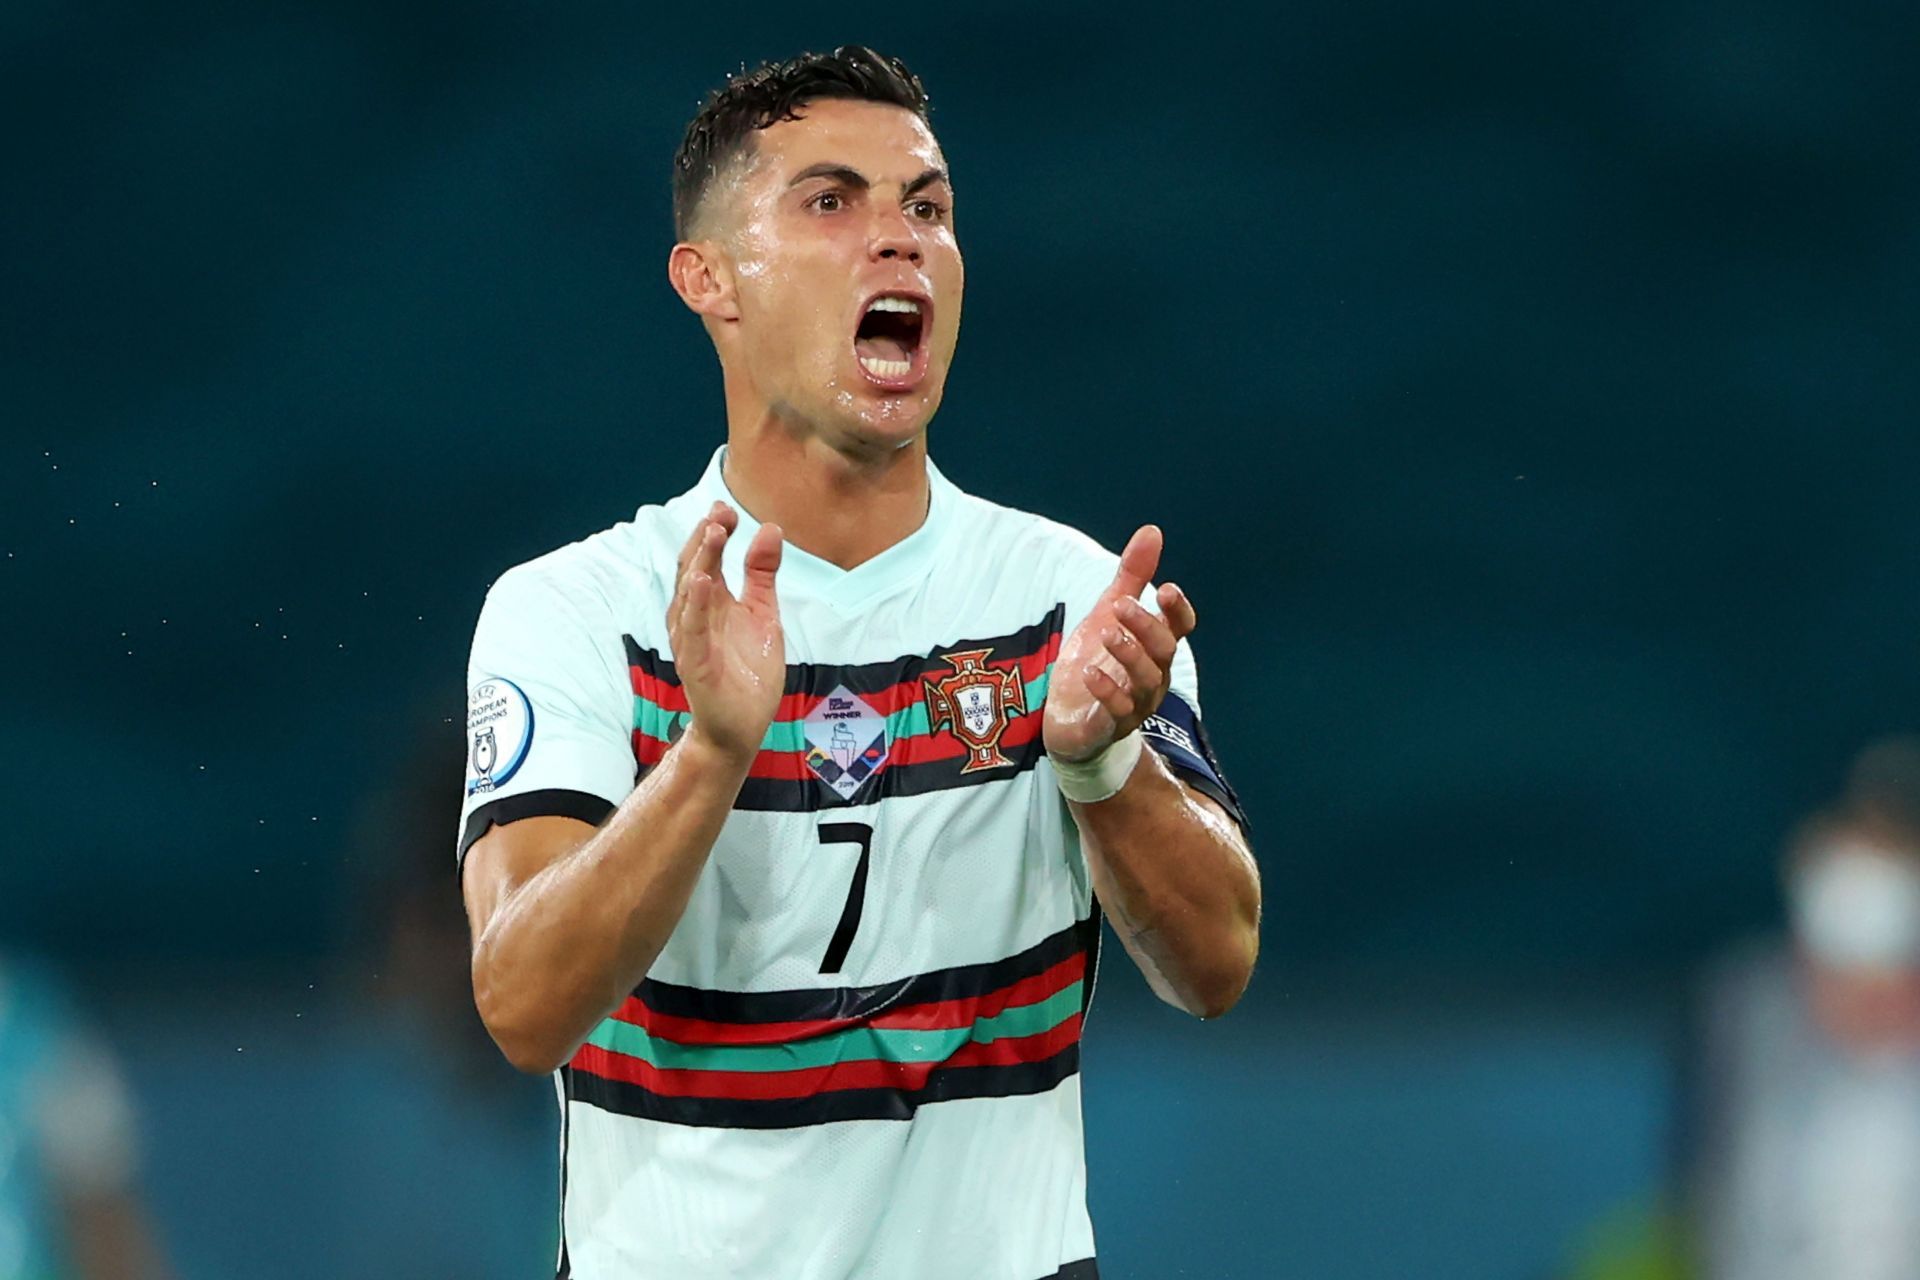 Cristiano Ronaldo in action for Portugal - UEFA Euro 2020: Round of 16